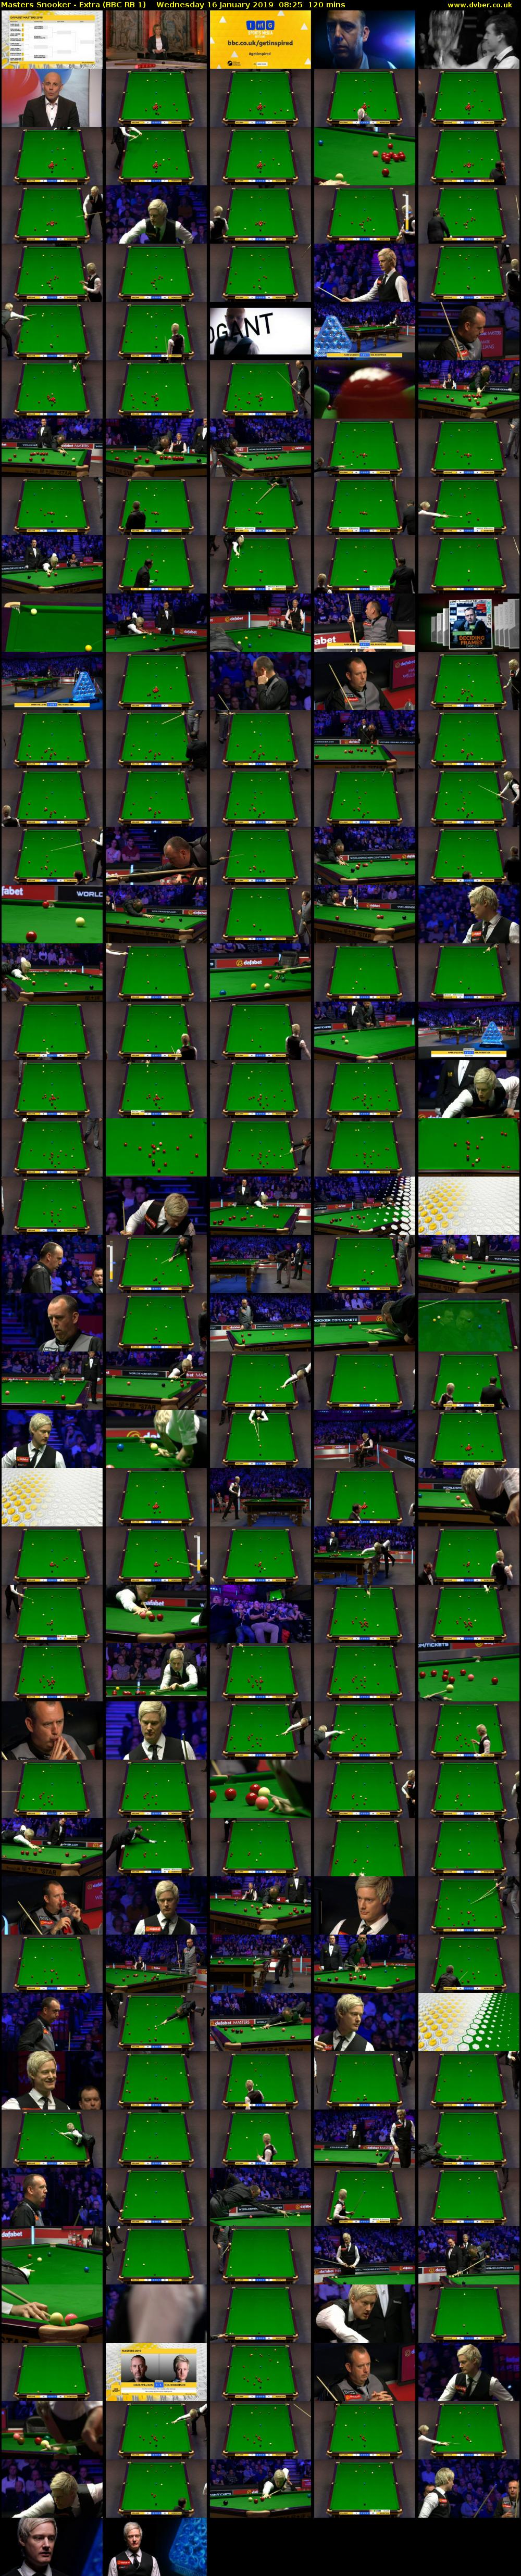 Masters Snooker - Extra (BBC RB 1) Wednesday 16 January 2019 08:25 - 10:25